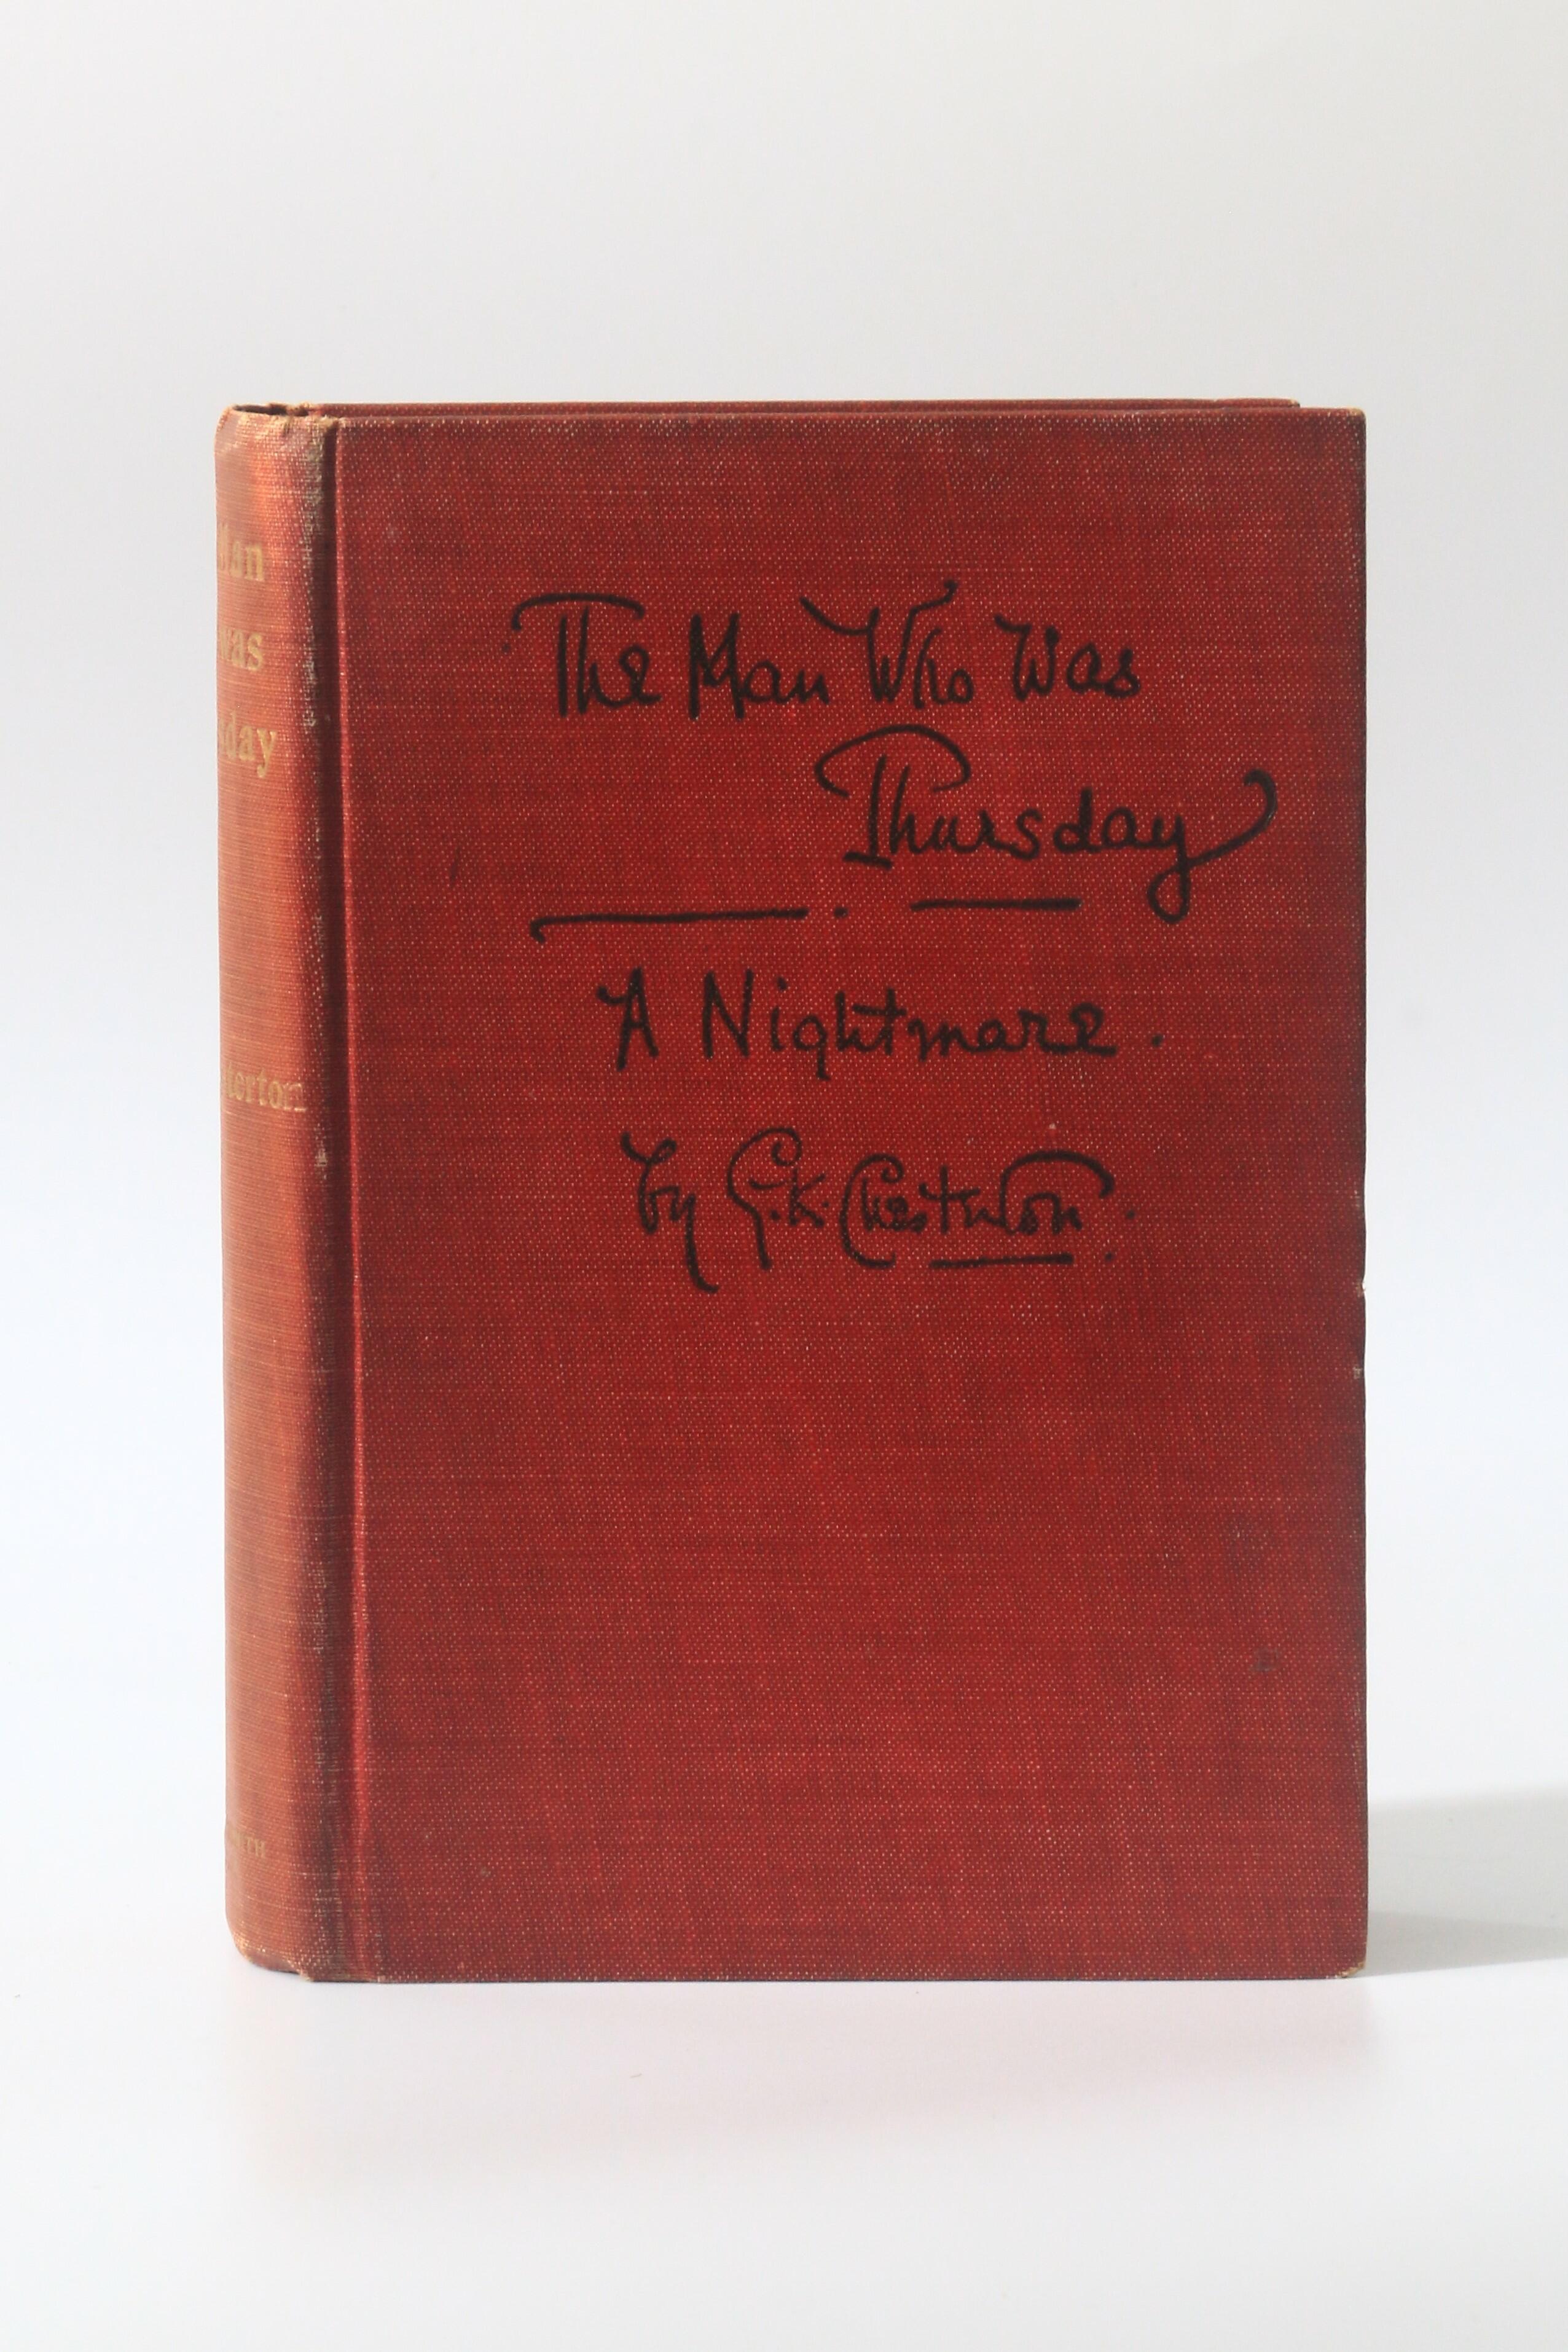 G.K. Chesterton - The Man who was Thursday - J.W. Arrowsmith., 1908, First Edition.